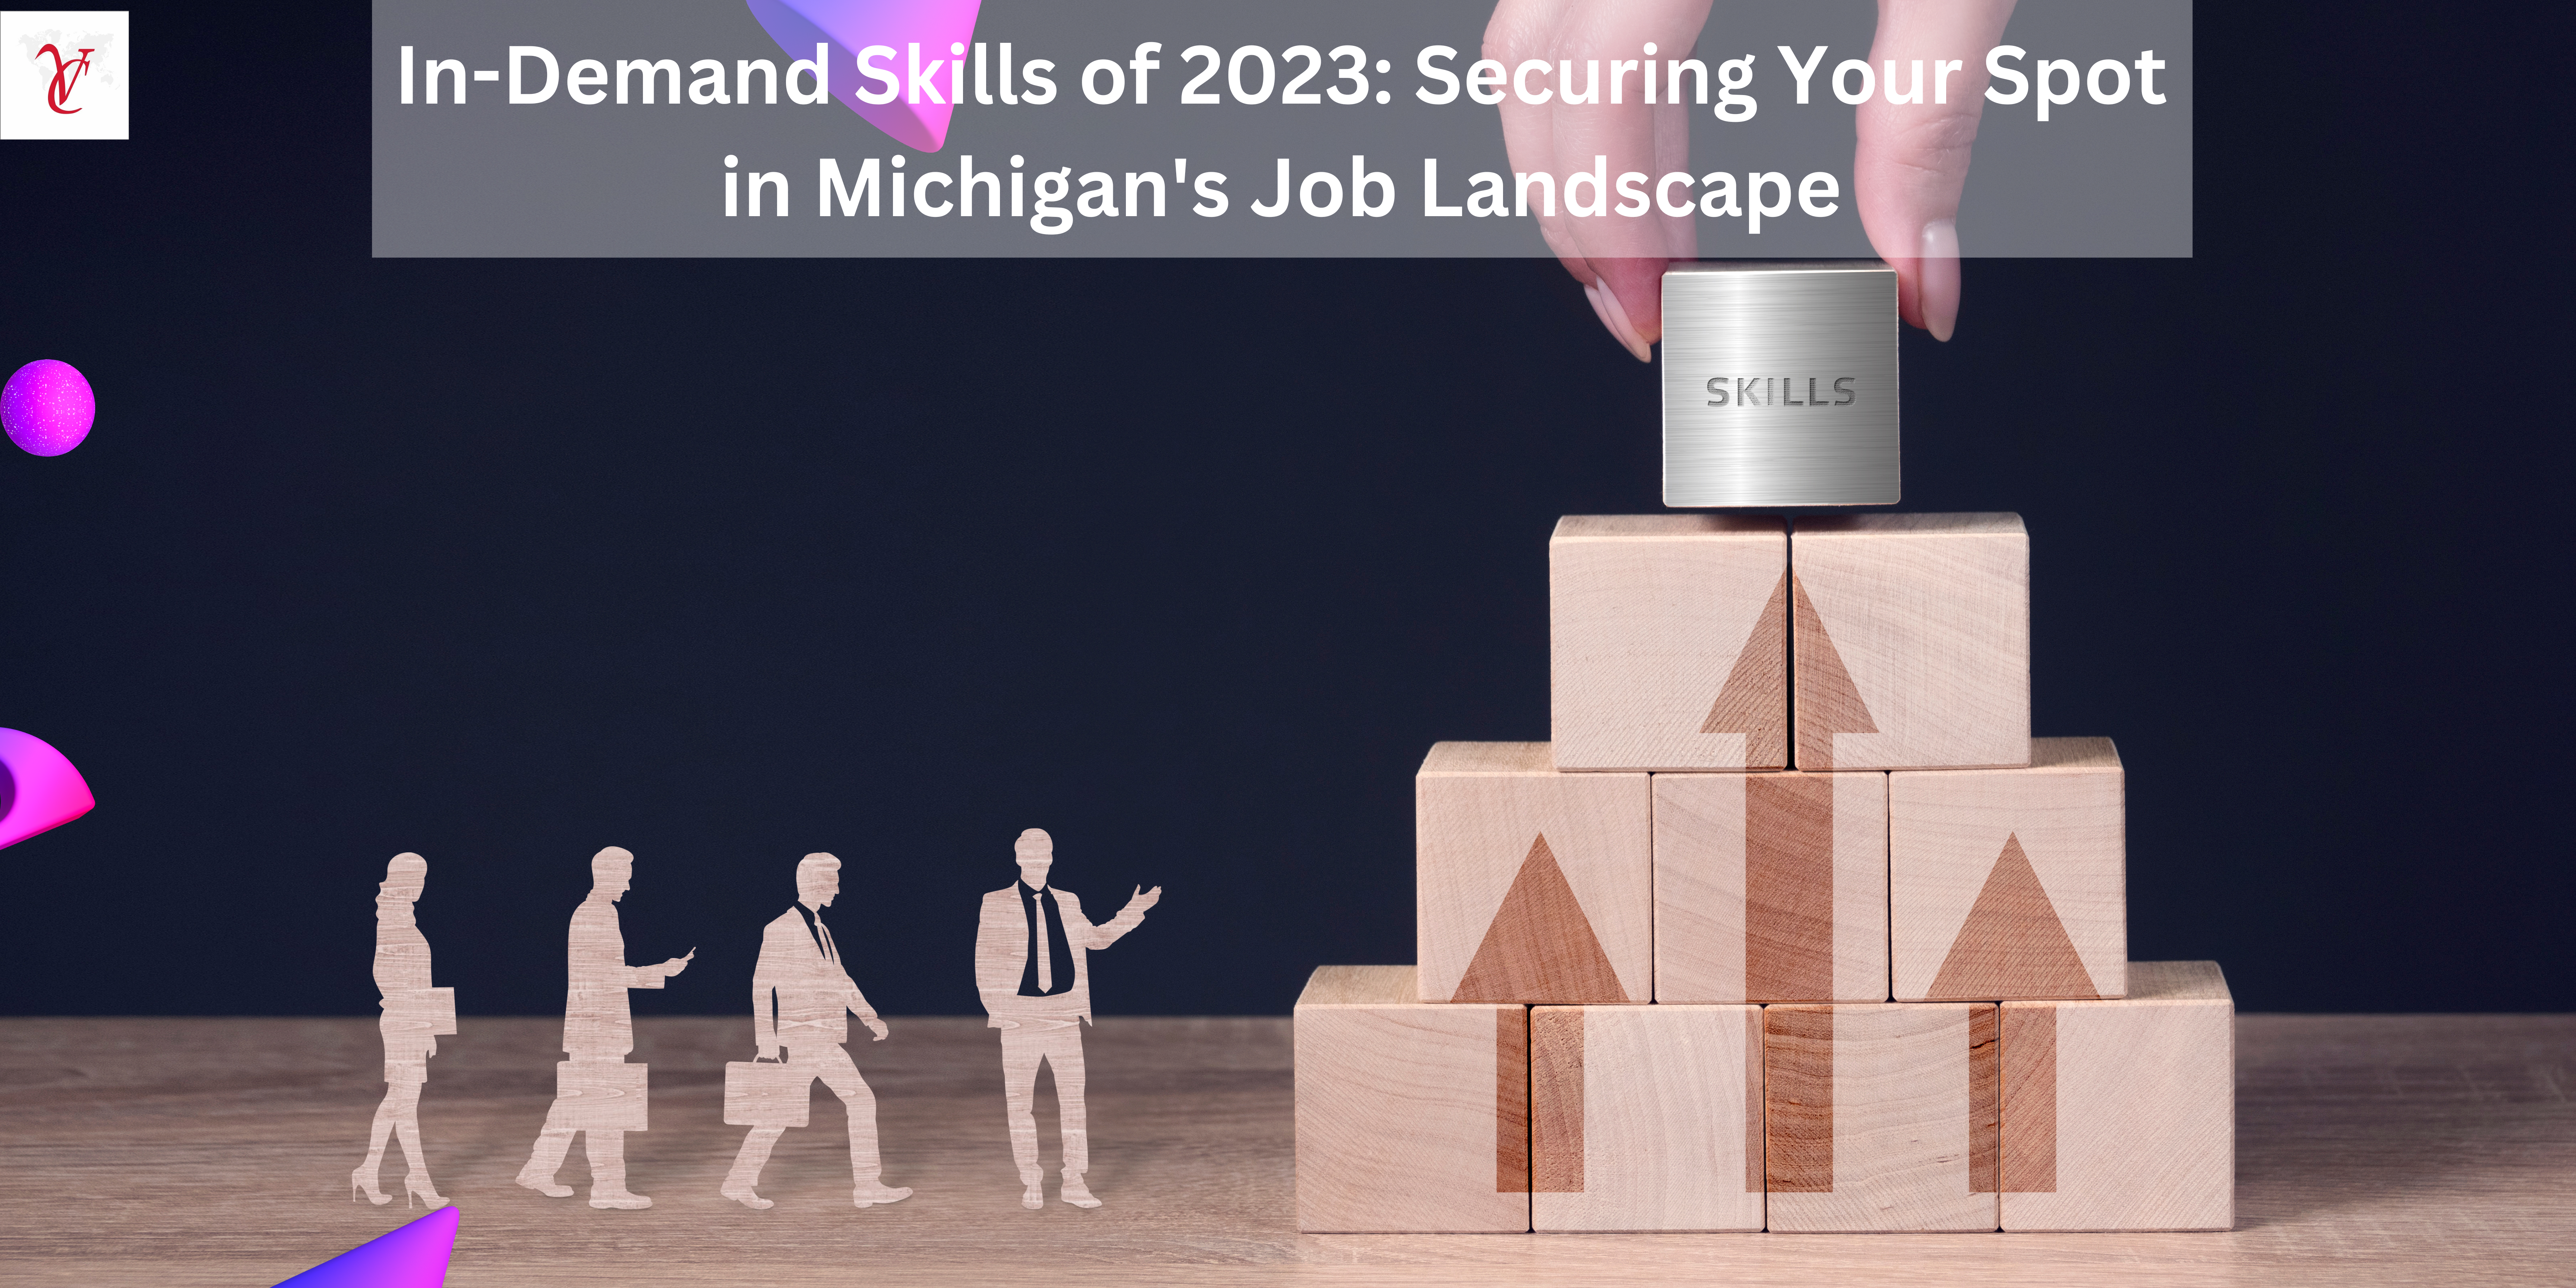 In-Demand Skills Of 2023: Securing Your Spot In Michigan’s Job Landscape